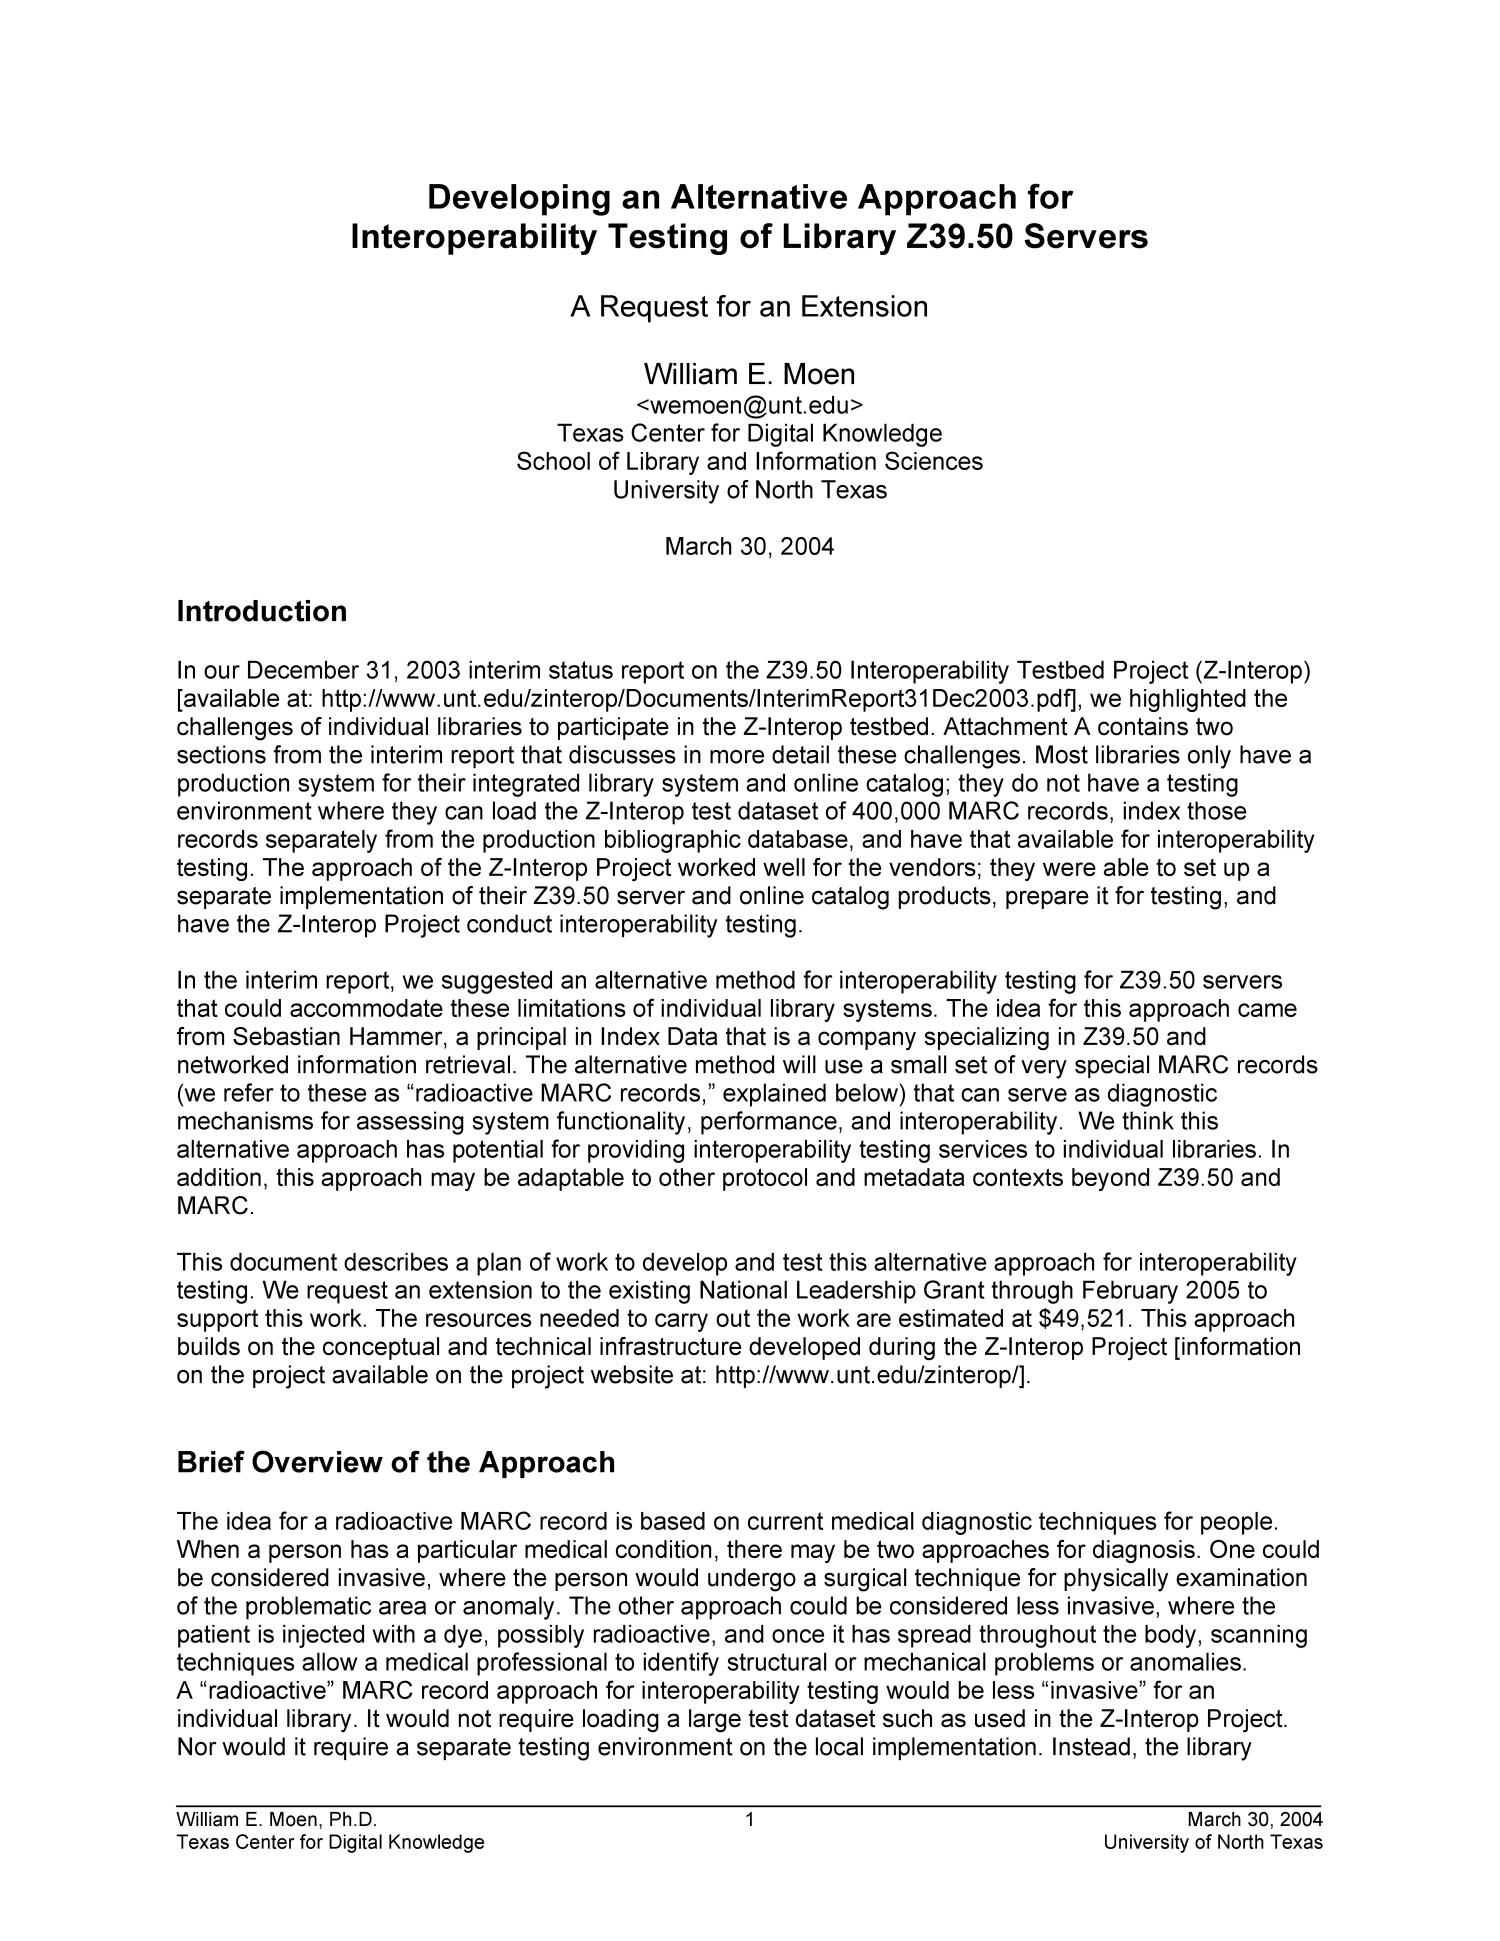 Developing an Alternative Approach for Interoperability Testing of Library Z39.50 Servers
                                                
                                                    1
                                                